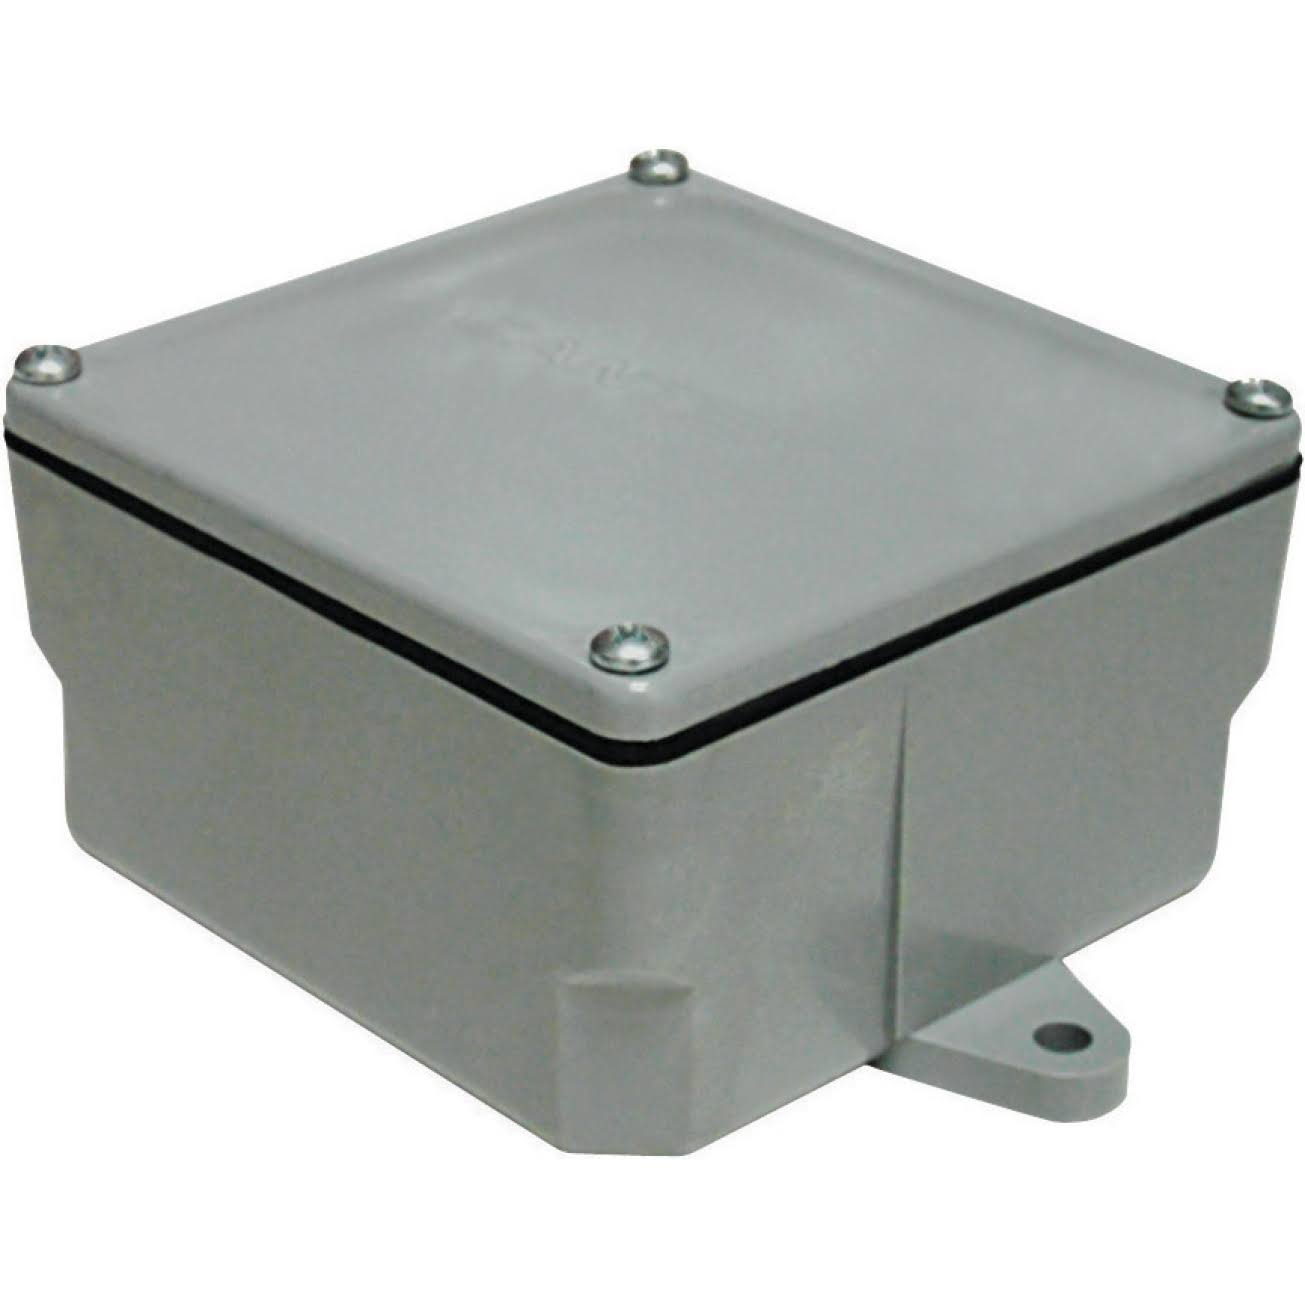 Cantex Plastic New Work Electrical Box